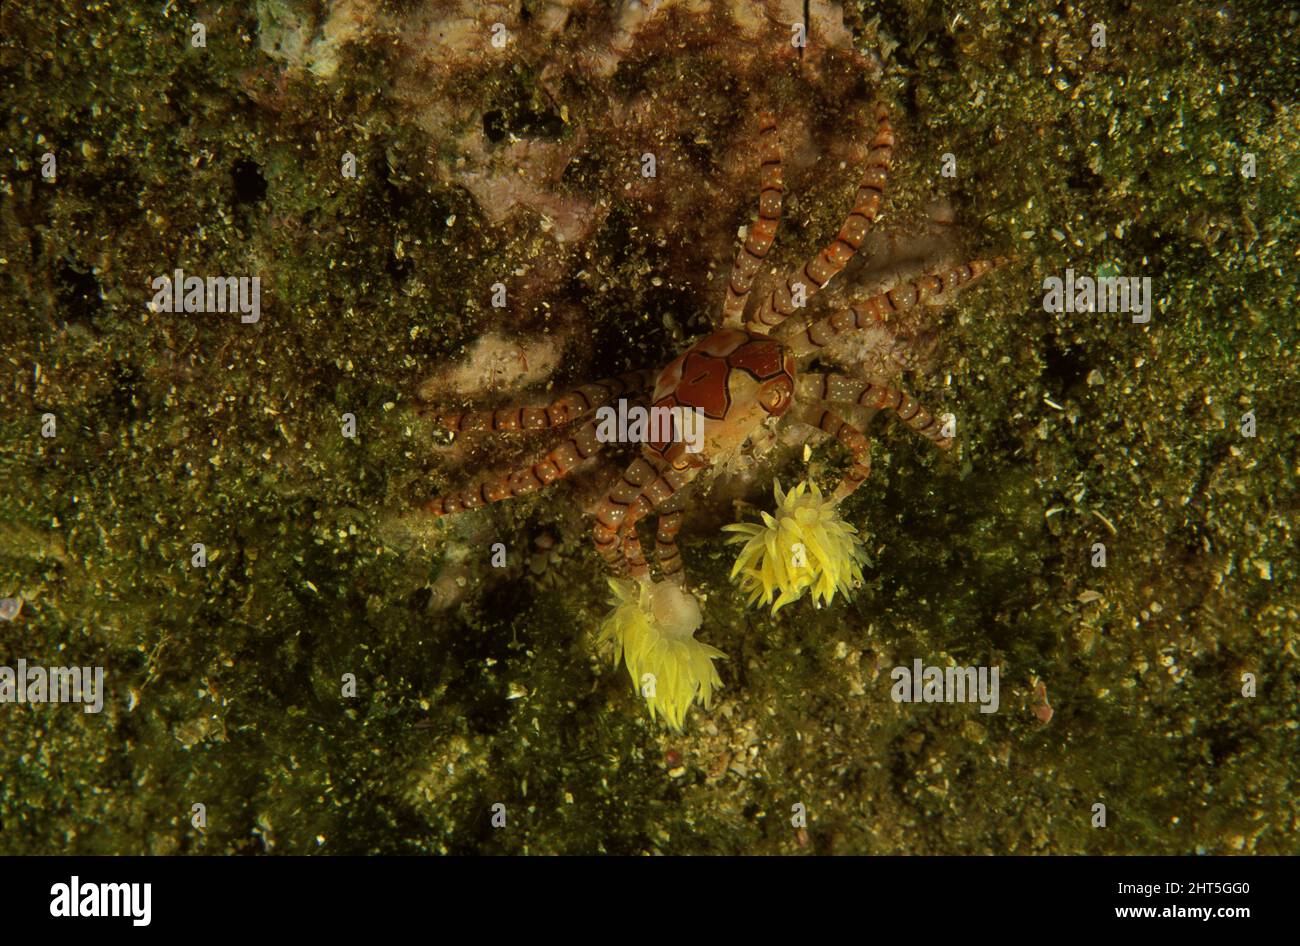 Boxer crab (Lybia tessellata), holding stinging anemones for protection and for stunning prey. Stock Photo